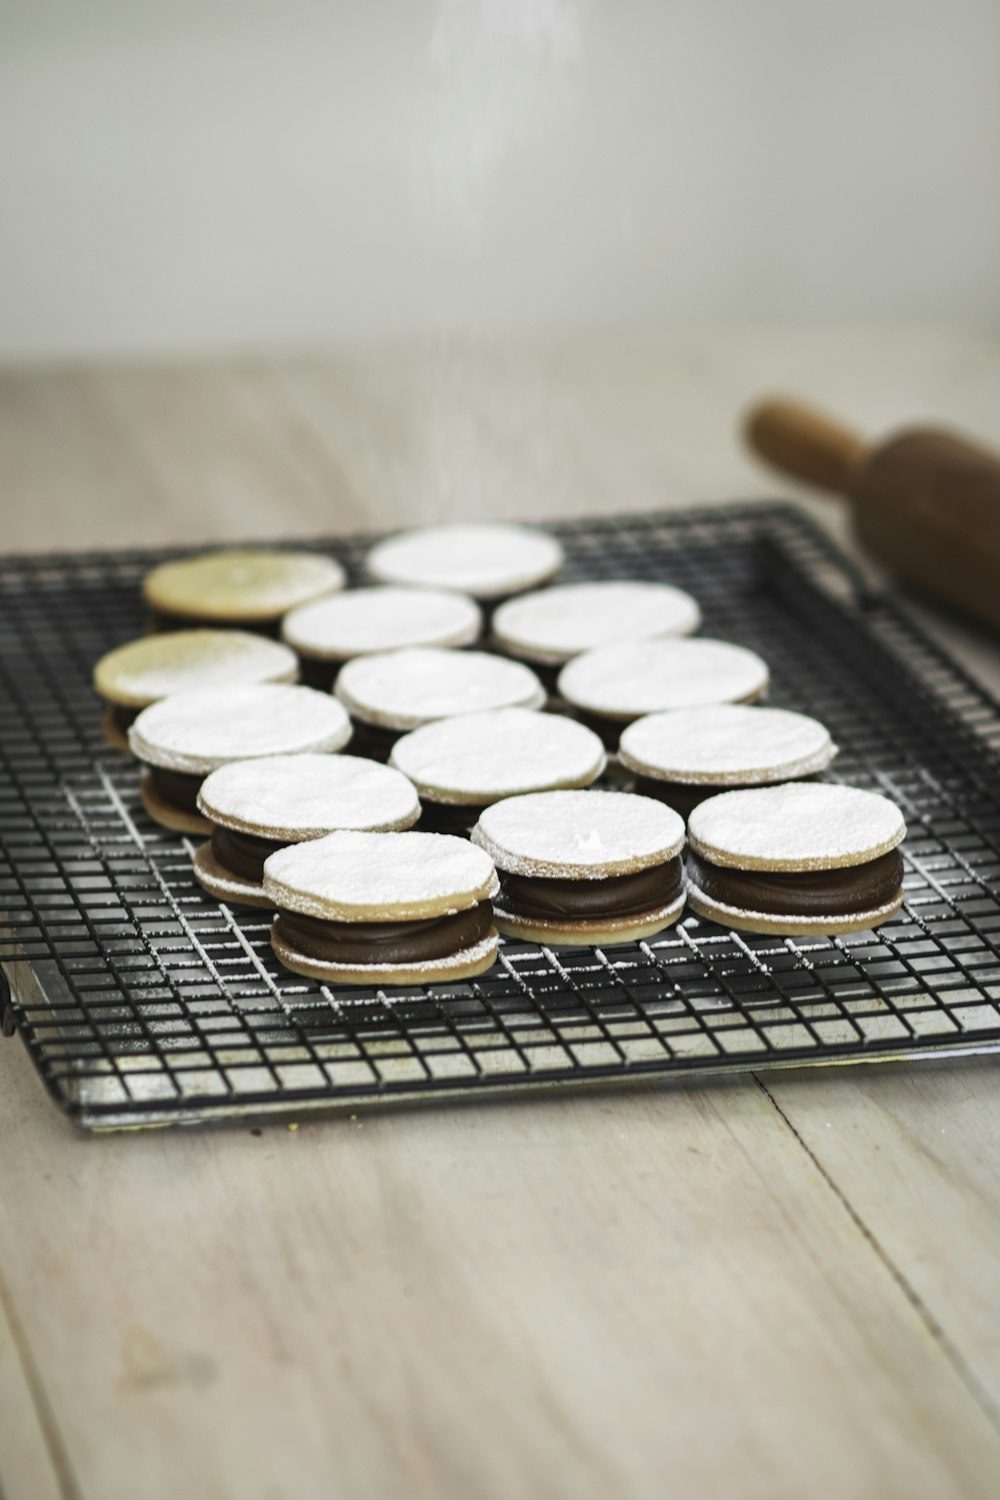 white and brown round coins on black metal tray